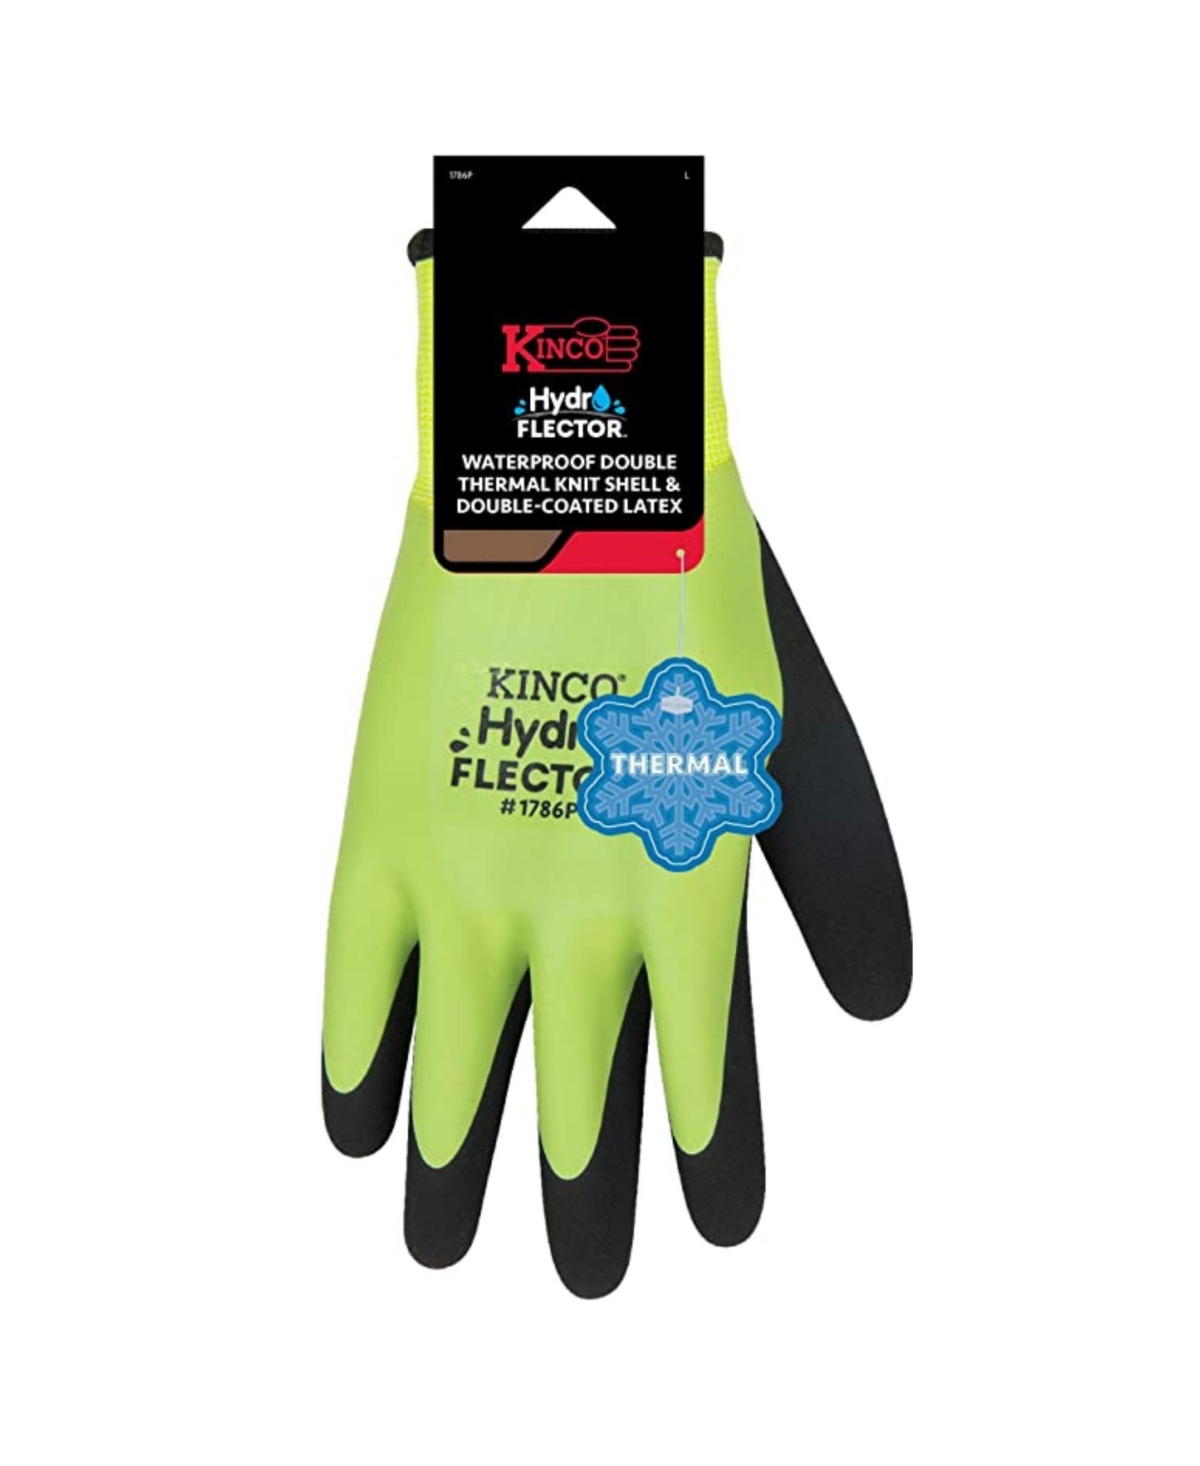 Kinco Hydroflector Waterproof Double Thermal Shell and Coated Latex Gloves- Xl - Green